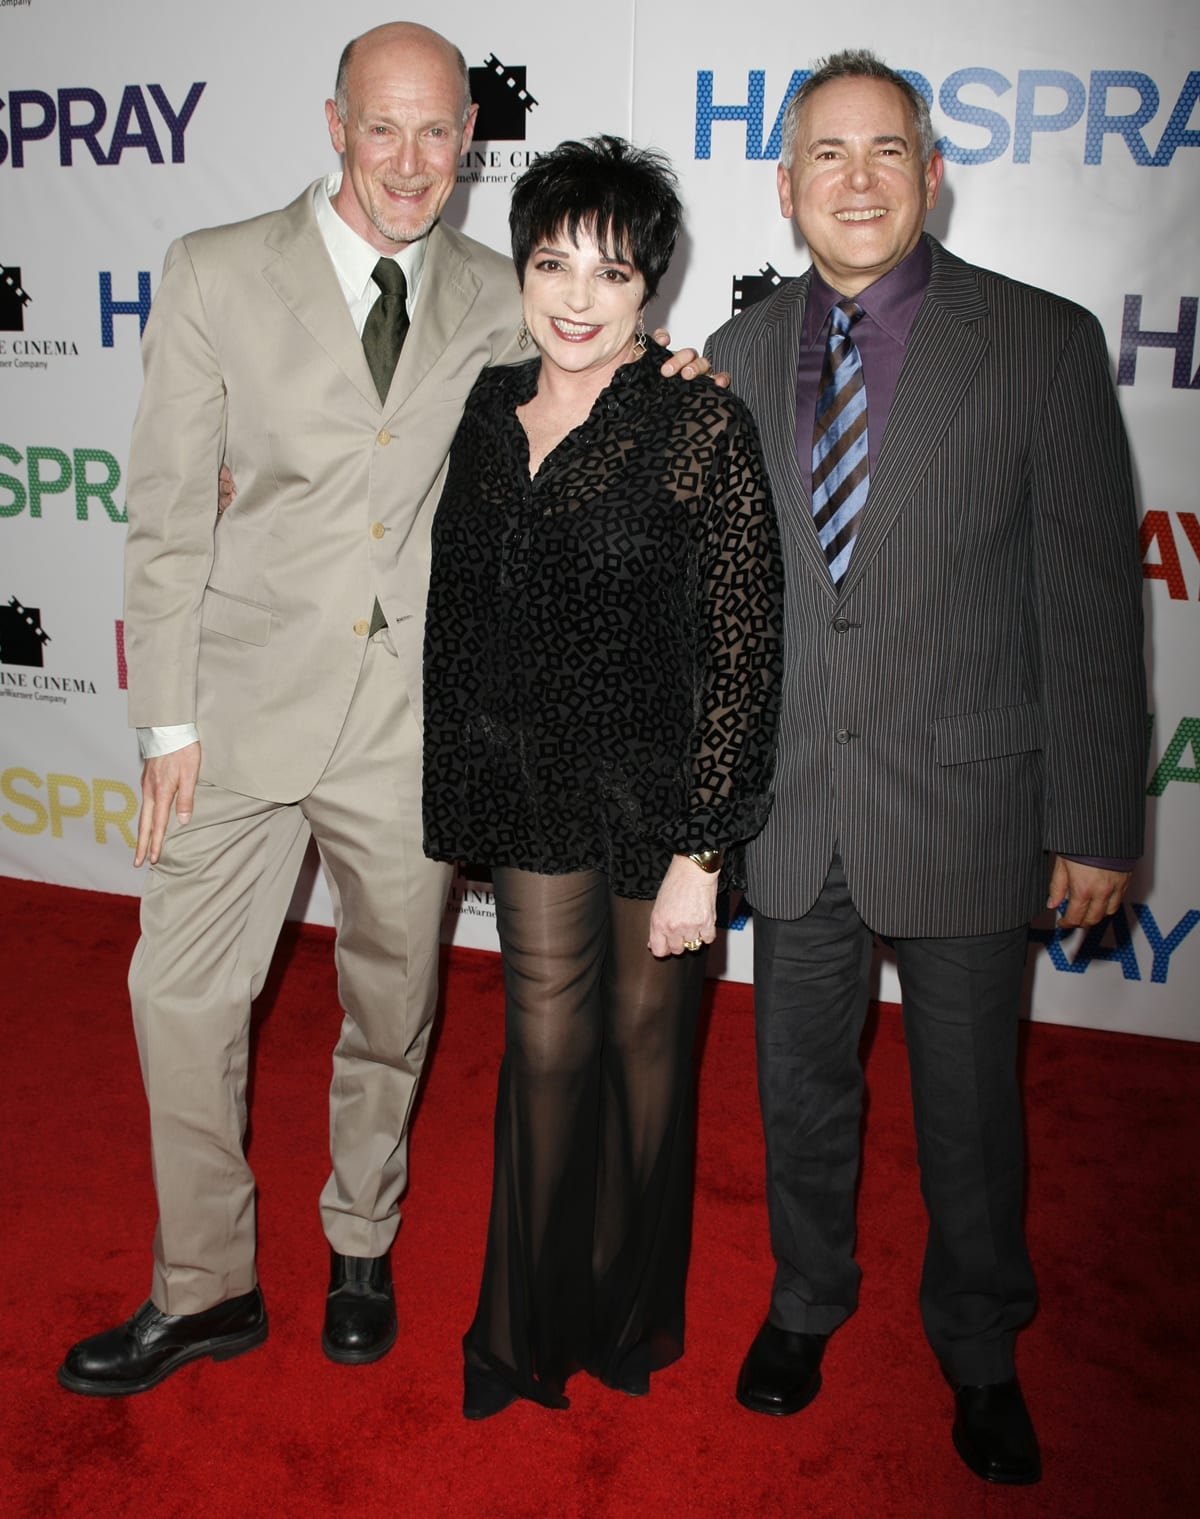 Producer Craig Zadan, Liza Minnelli, and producer Neil Meron arrive at the New York premiere of "Hairspray"